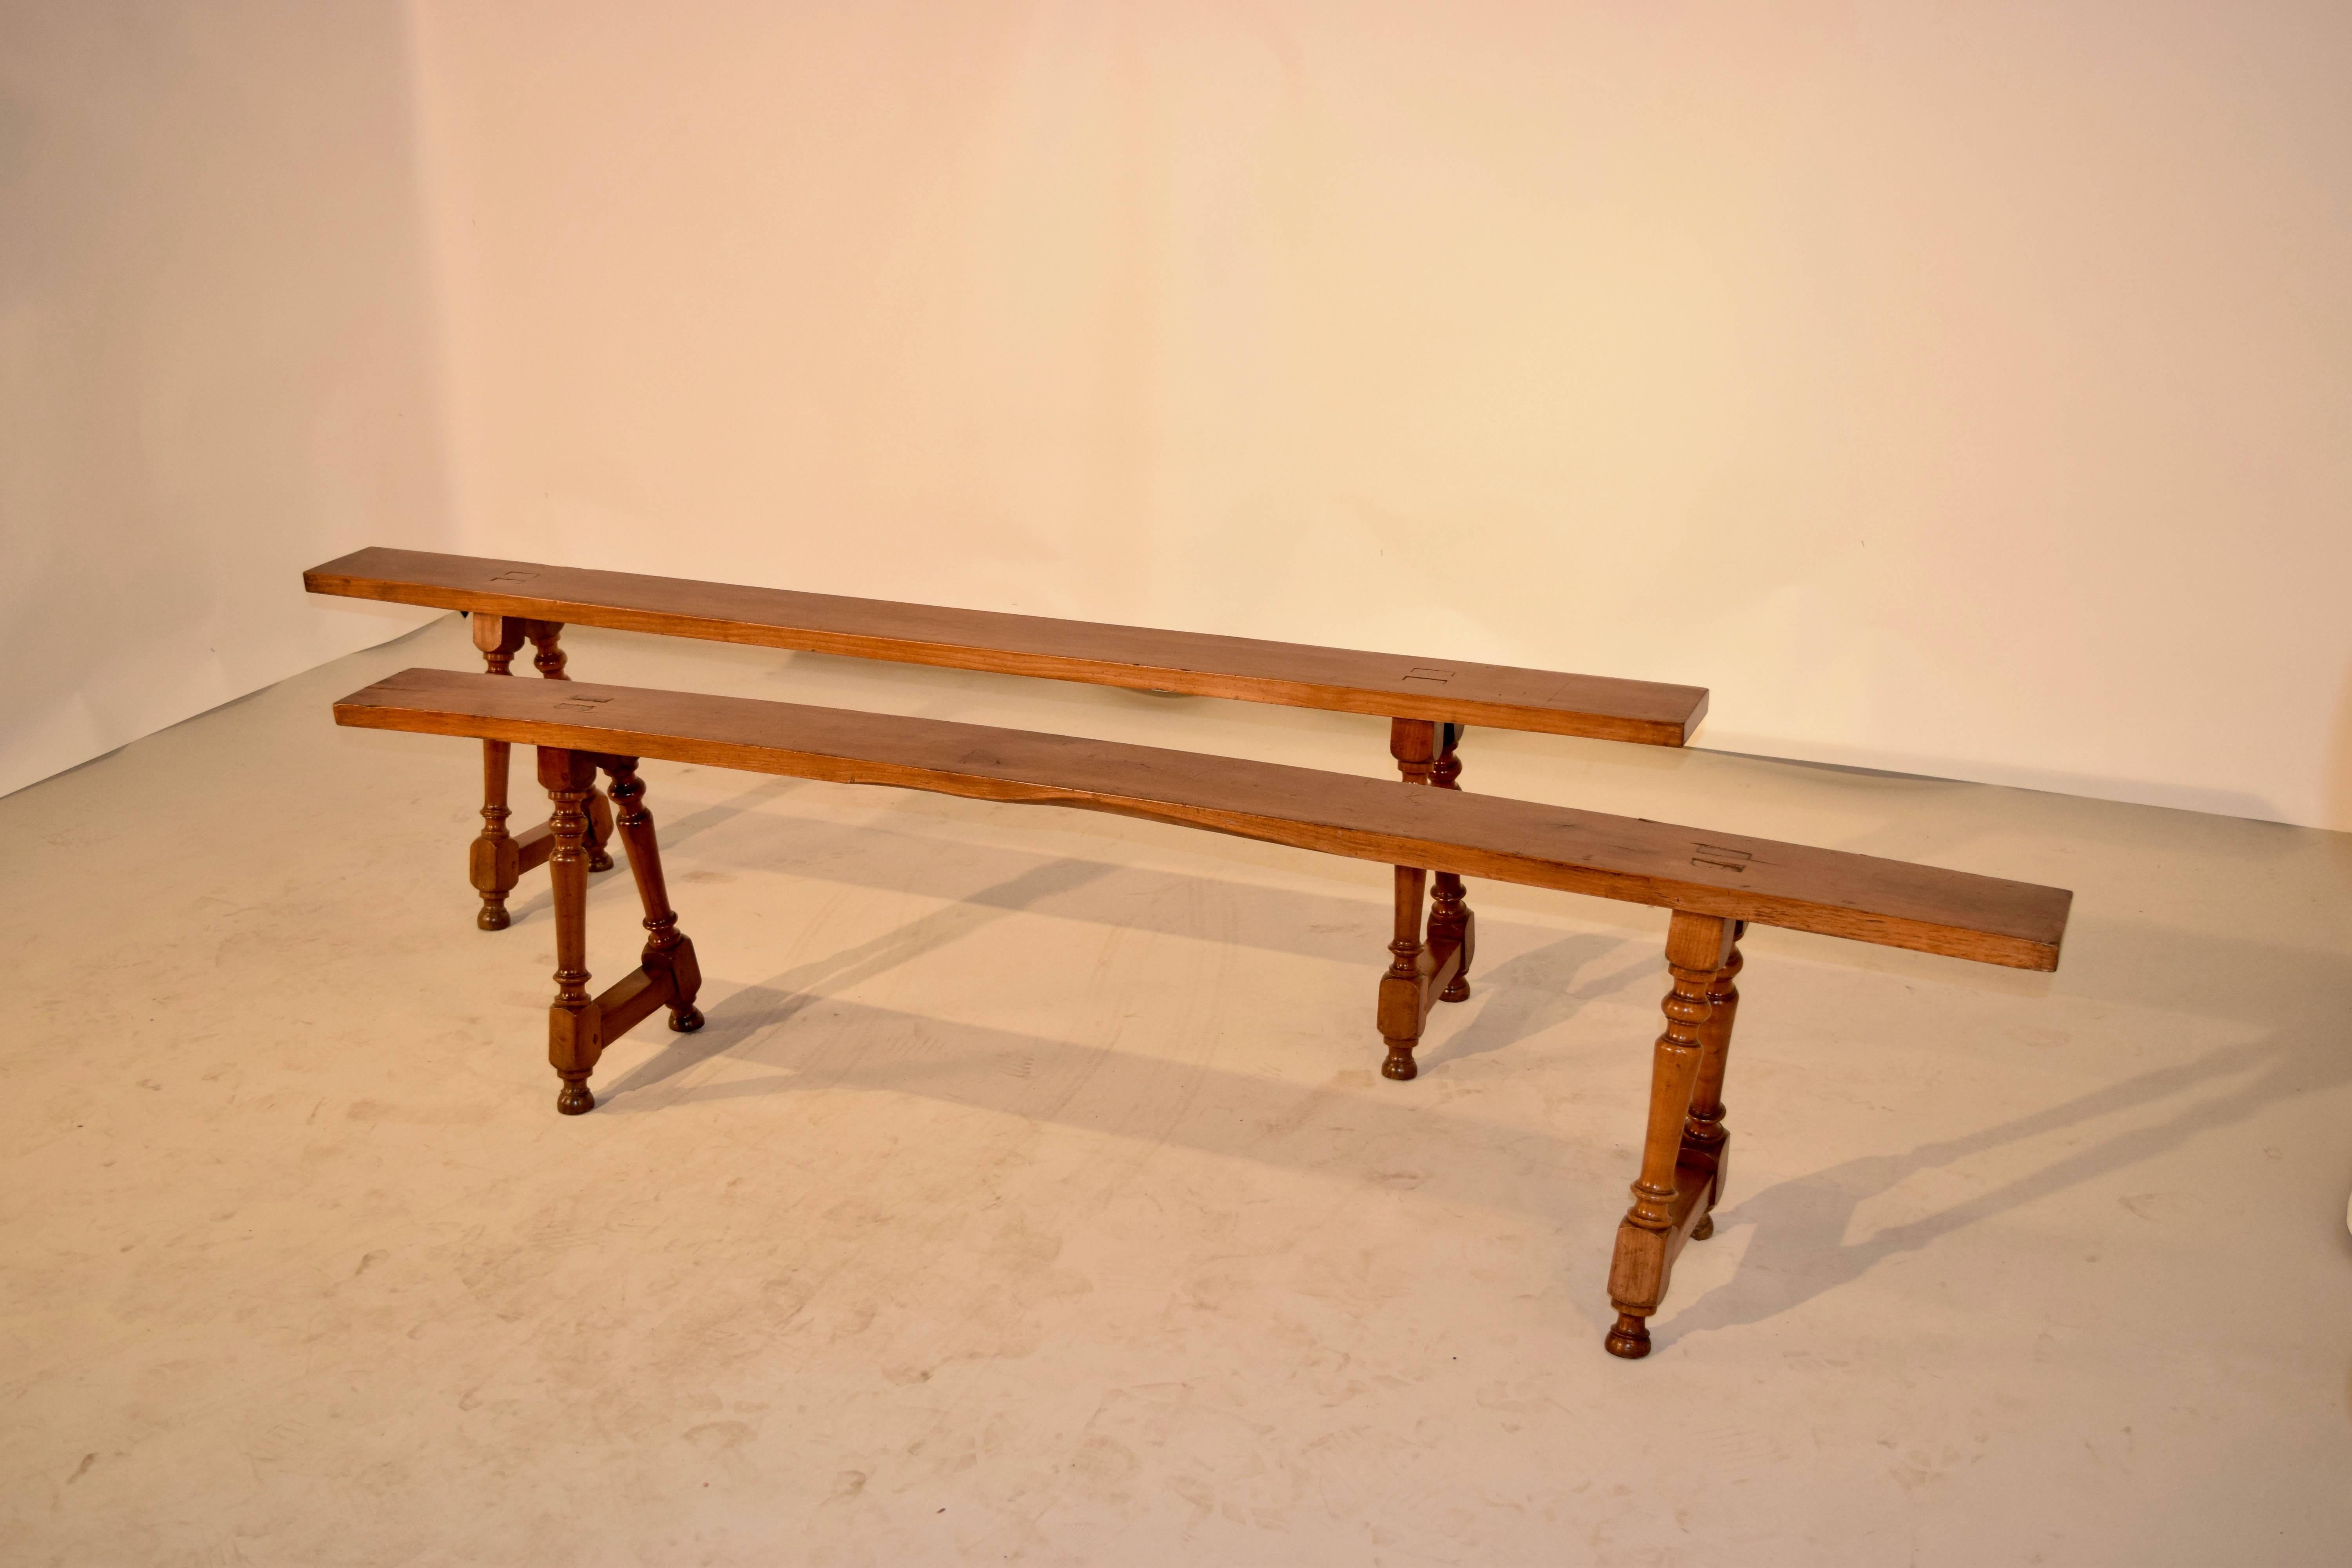 19th century pair of cherry benches from France. They are simply constructed with exposed mortises, and have wonderfully turned bases. One seat has a slight bow from age. The seat depth is 5.88.